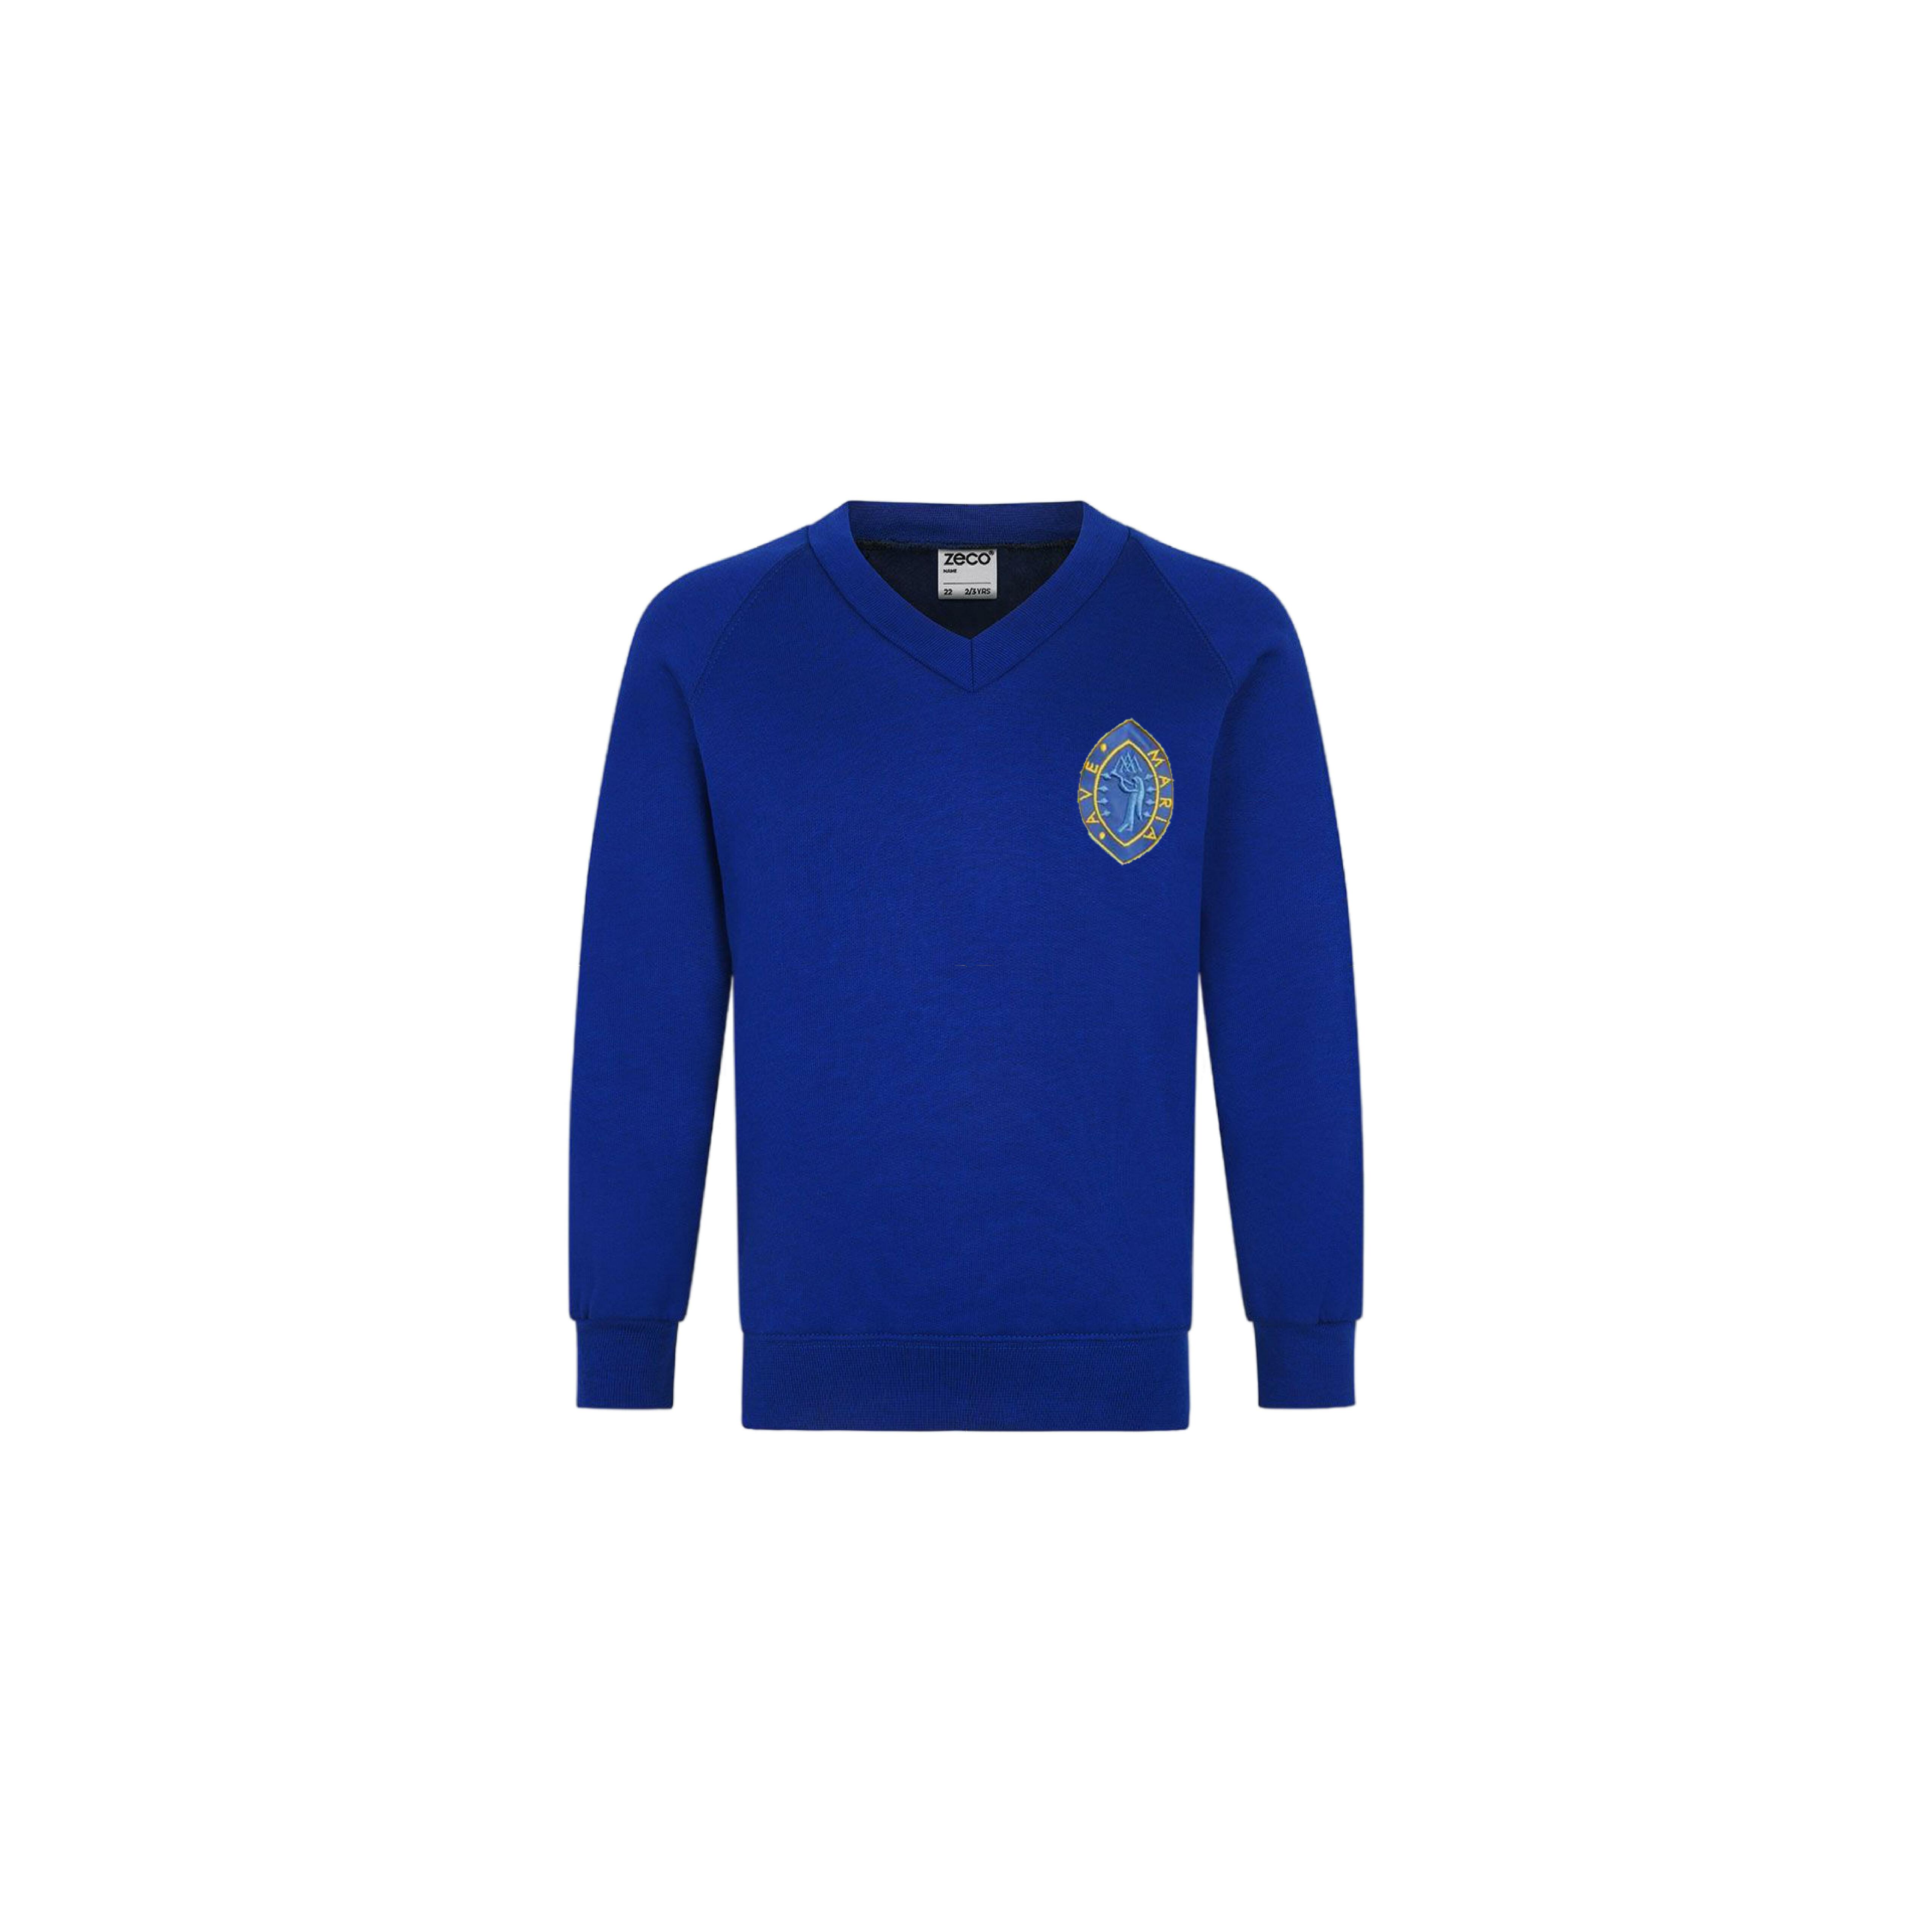 Our Lady of Annunciation Primary V Neck Sweatshirt